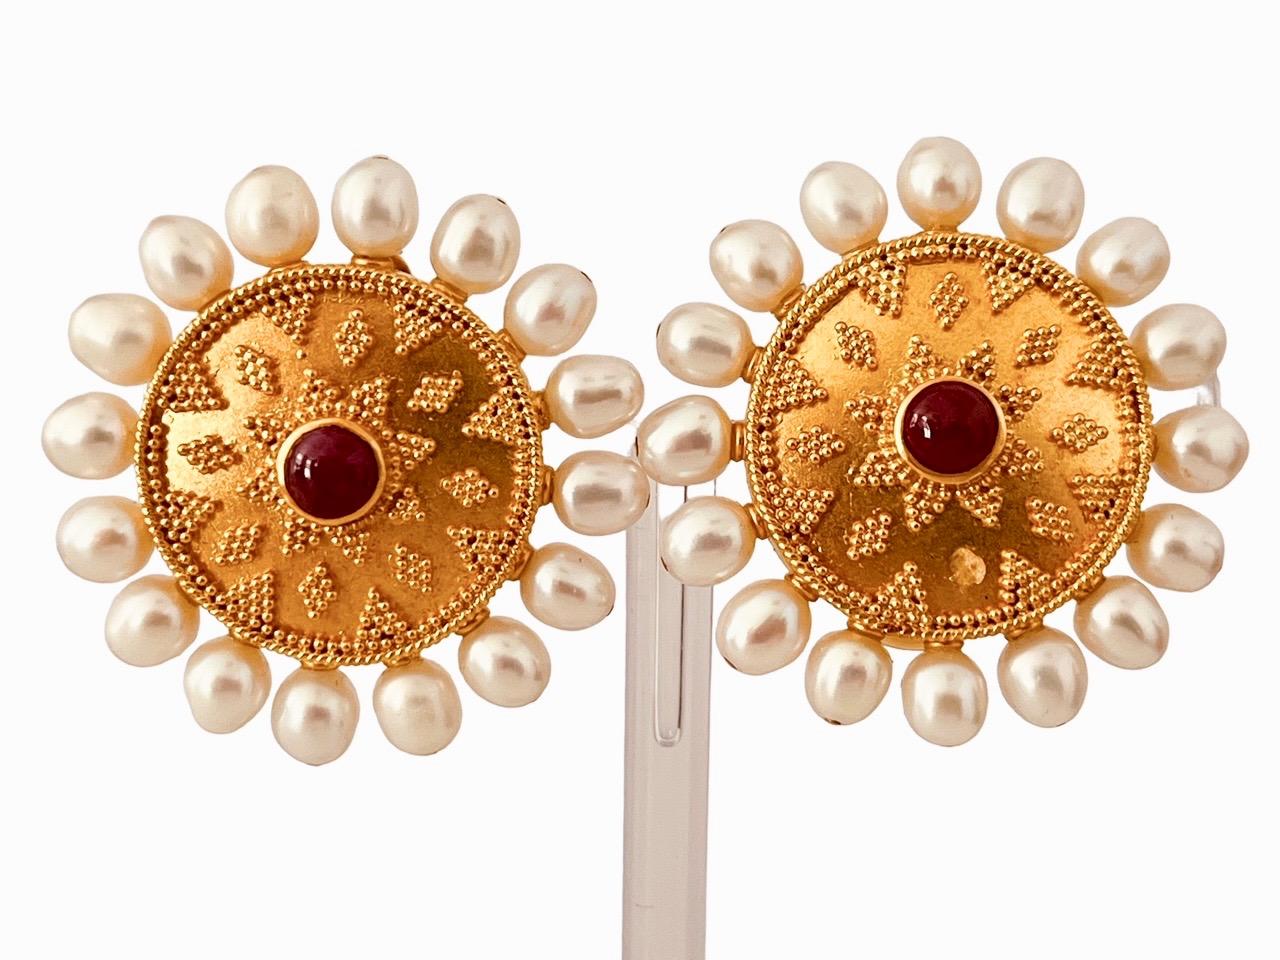 22ct Gold Granulated Disc Earrings Set With A Cabochon Ruby And Cultured Pearls For Sale 4